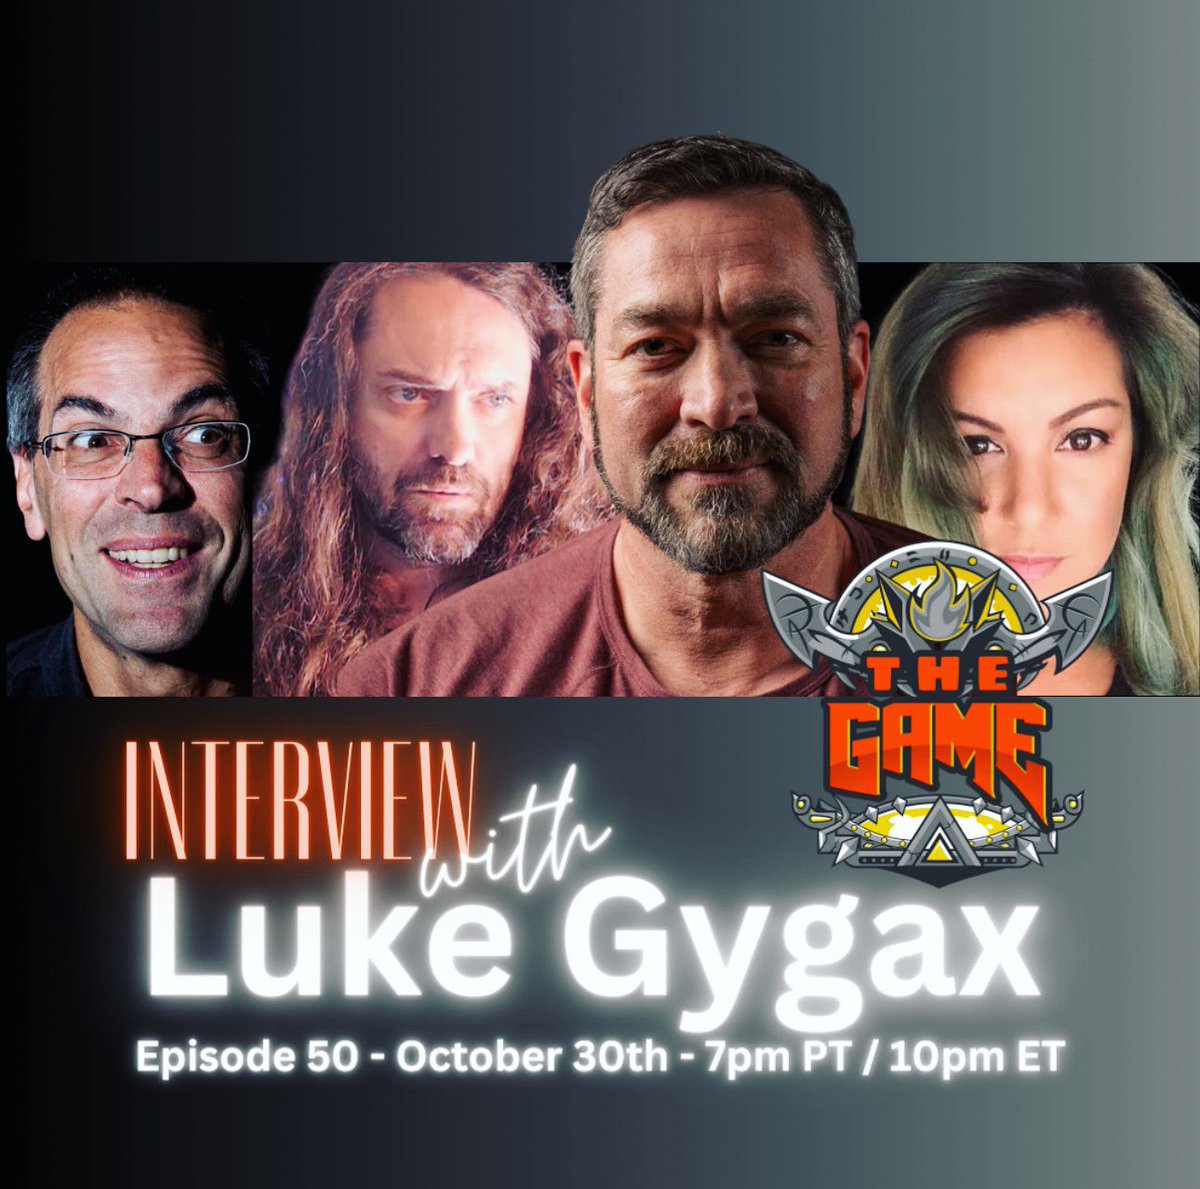 Monday October 30th, the Day of the Dead listen to my spirited interview on The Game. #garycon #foundersandlegends #gygax #garycon #gaxxworx #g20 Watch October 30th 7pm PT / 10pm ET on Dungeon Studios’ FB Page facebook.com/dungeonstudios… YouTube site: youtube.com/@dungeonstudio…